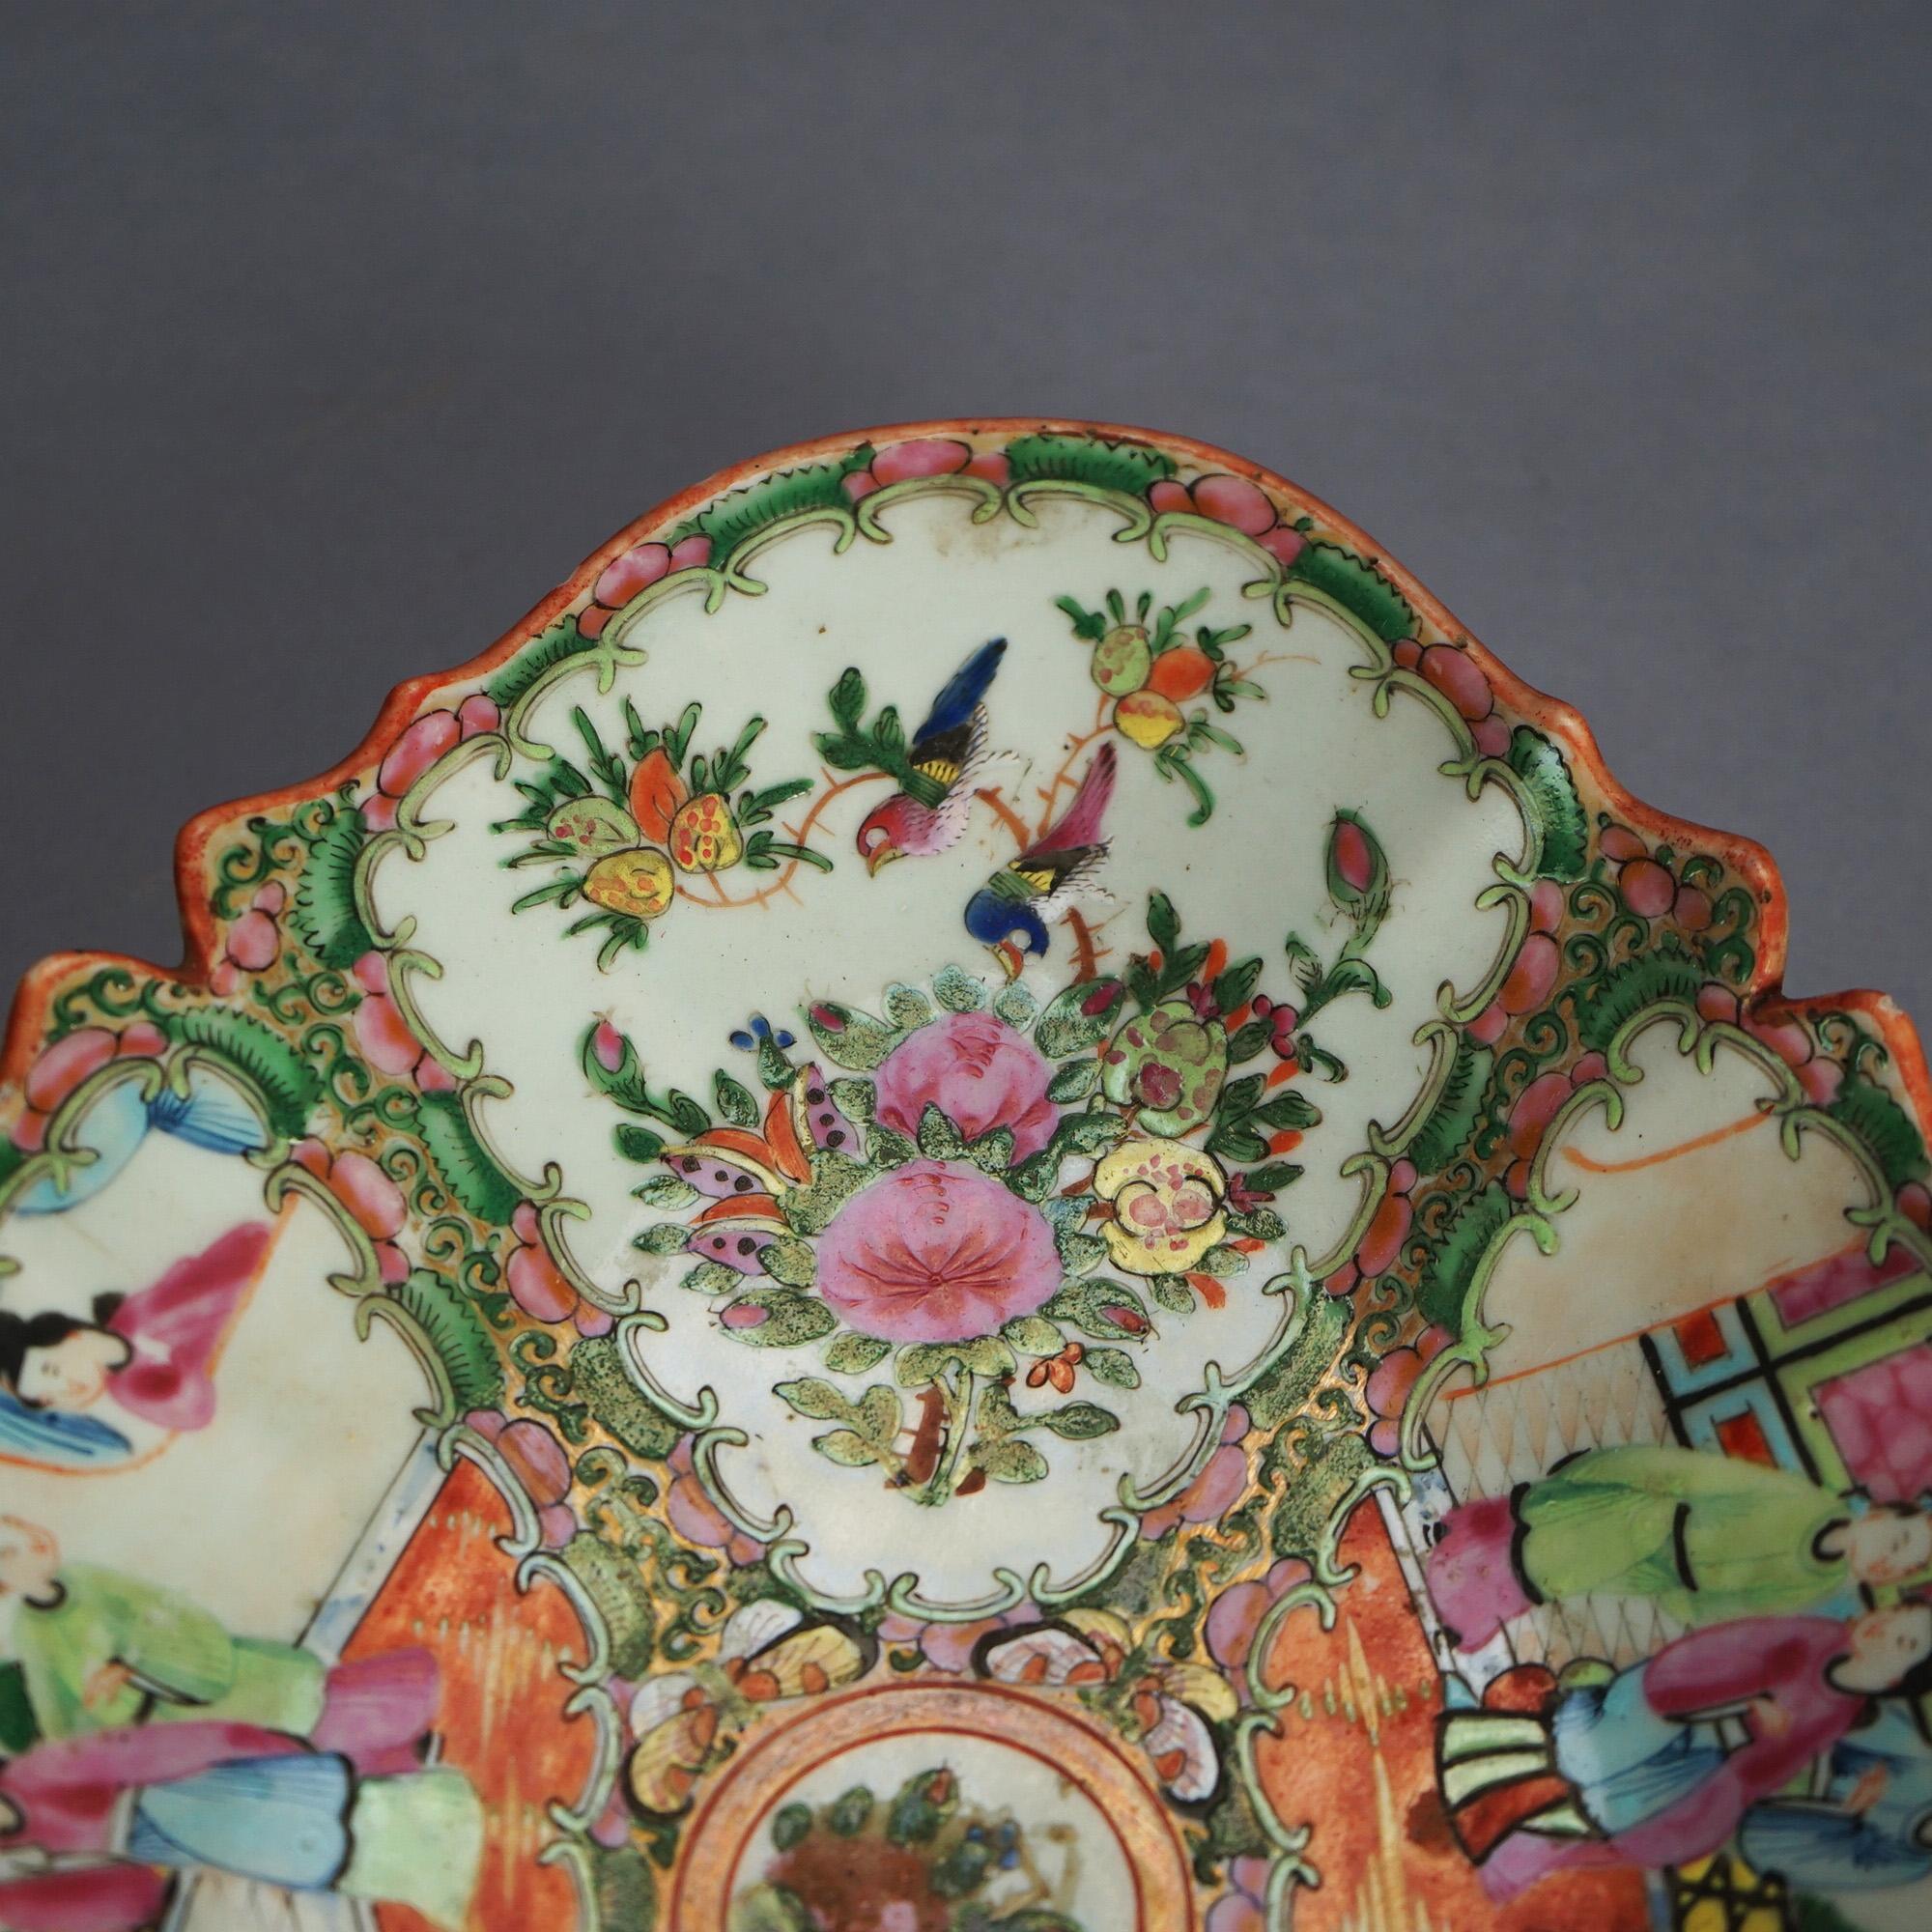 20th Century Antique Chinese Rose Medallion Porcelain Platter with Gardens & Figures C1900